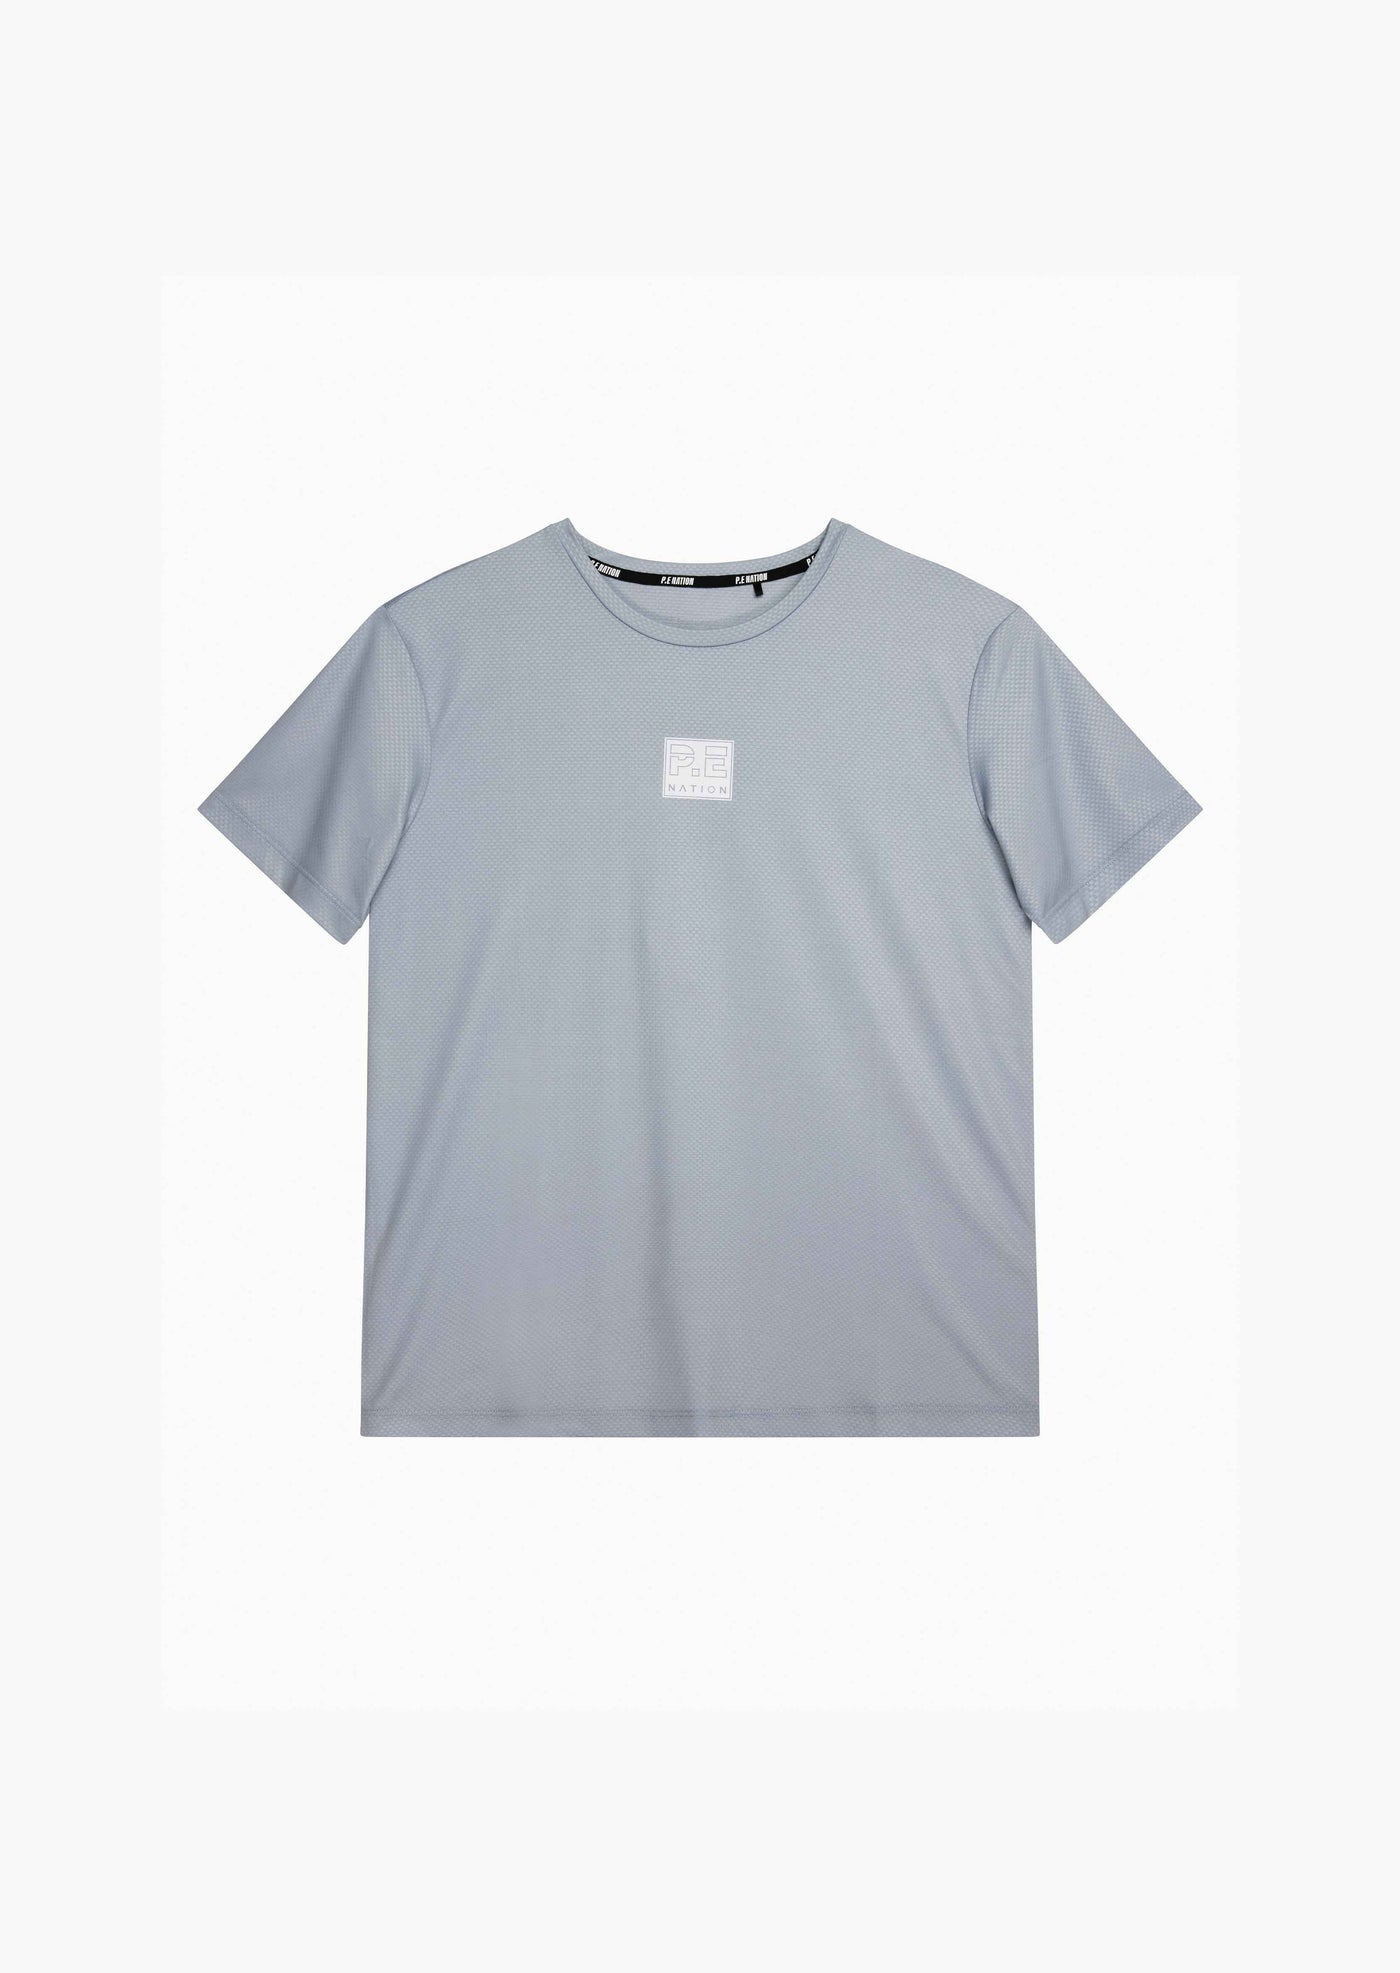 CROSSOVER AIR FORM TEE IN HIGH RISE